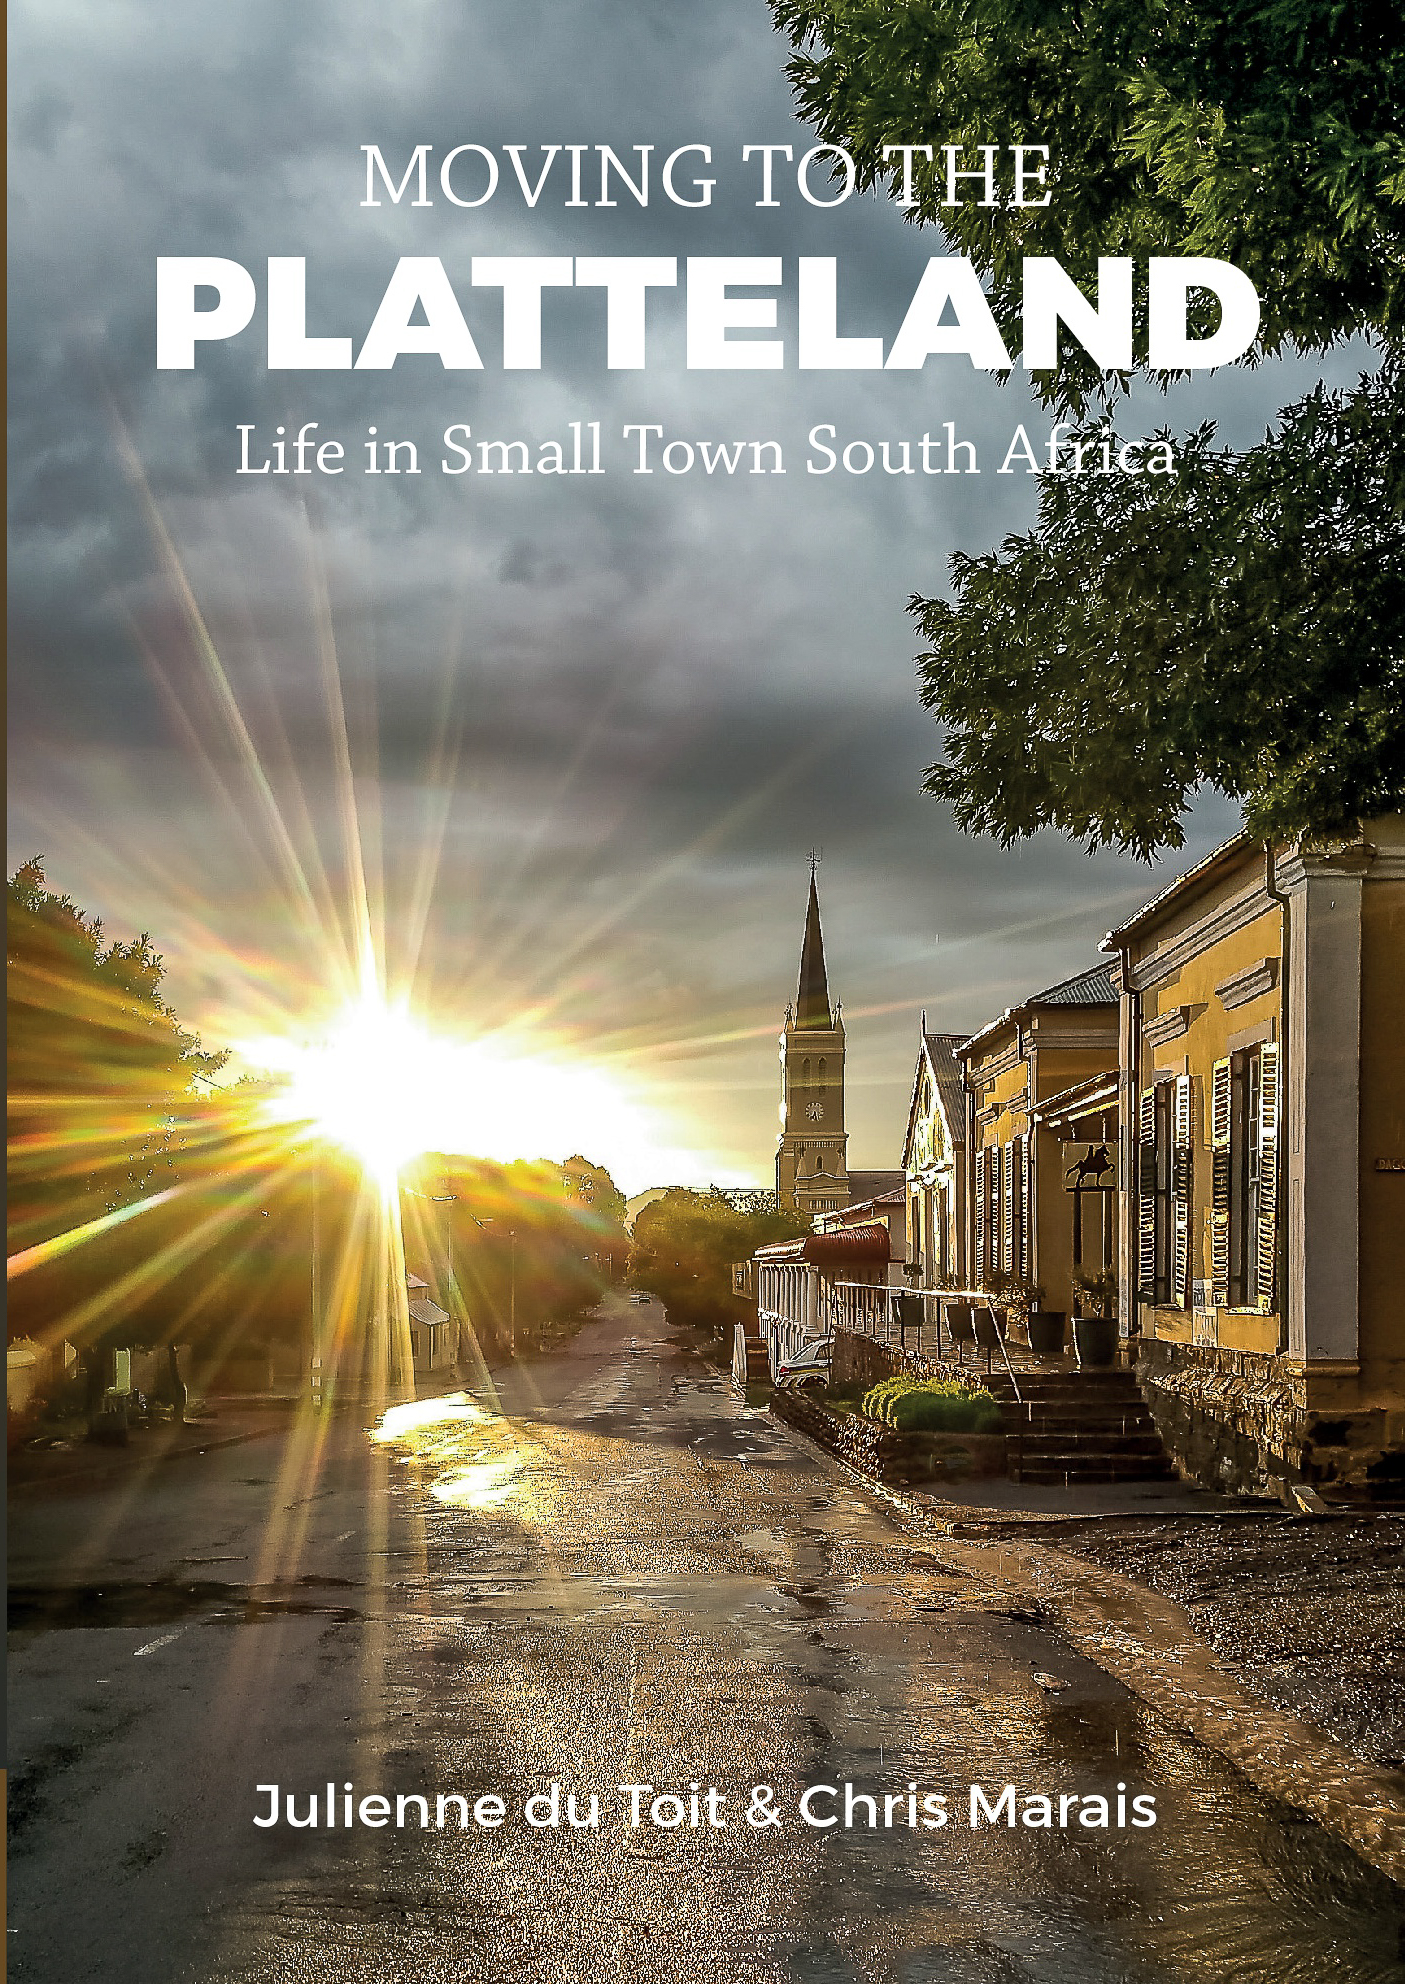 'Moving to the Platteland: Life in Small Town South Africa' by Chris Marais and Julienne du Toit